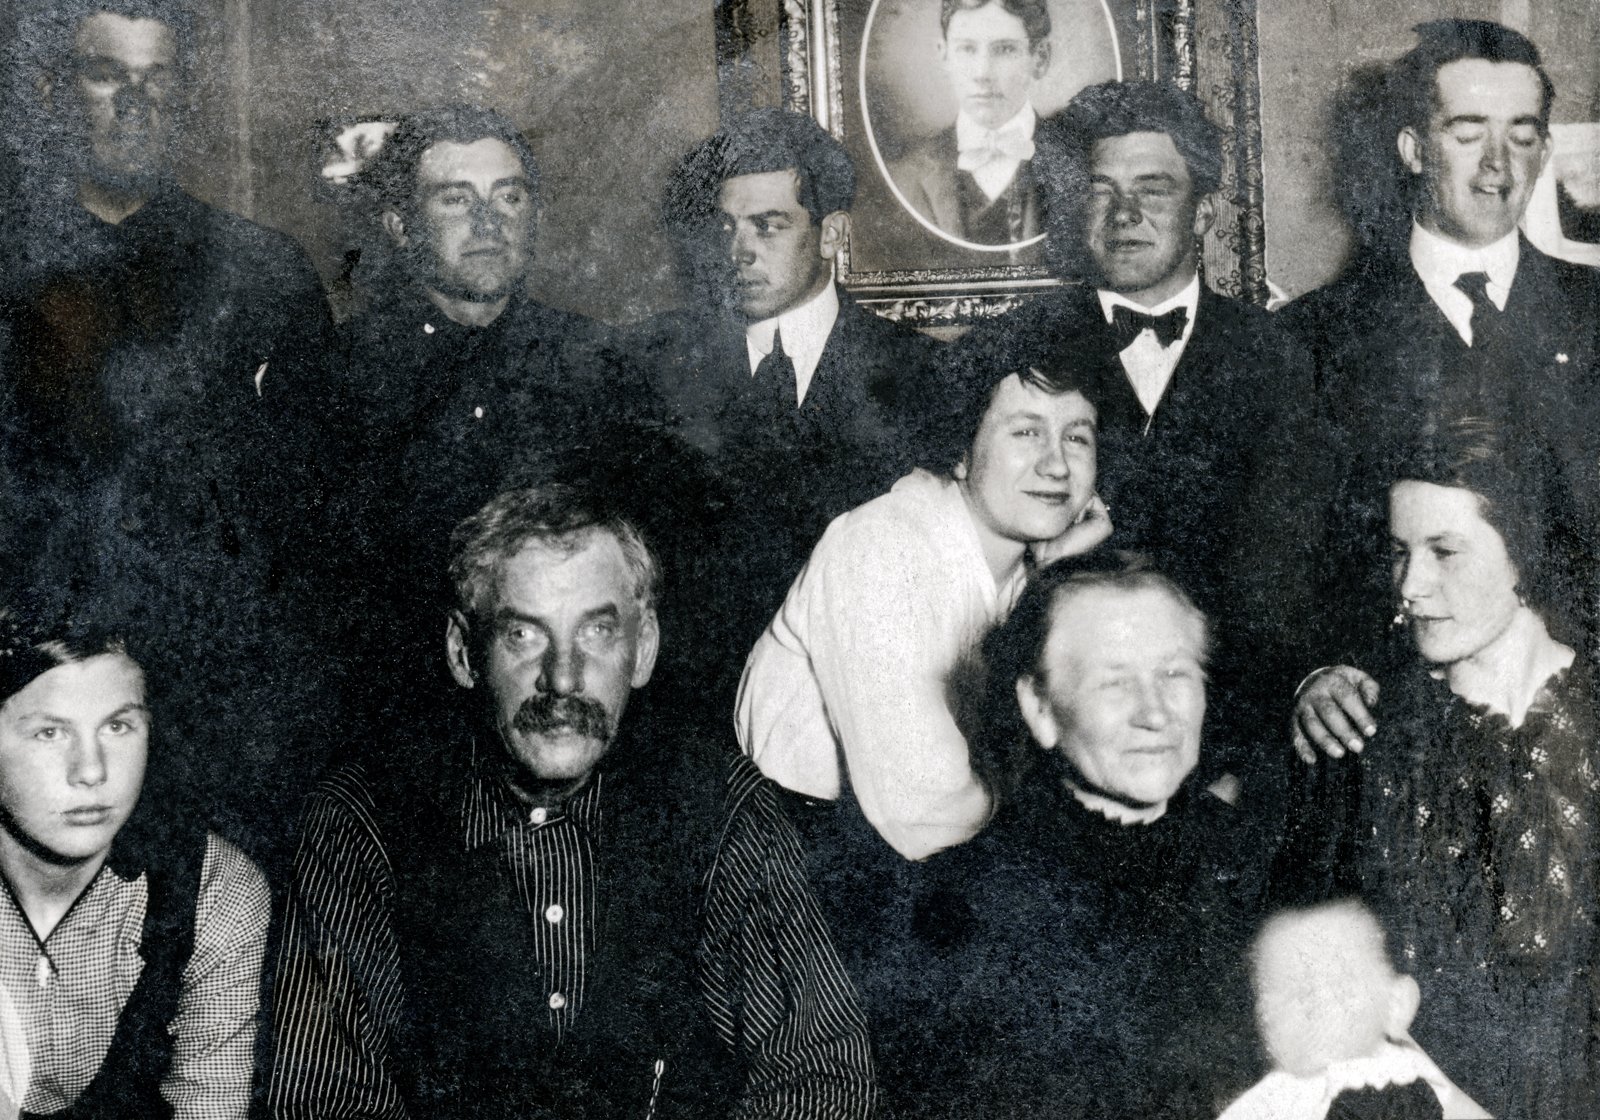 The Elliot family at home – front left is George Elliot.